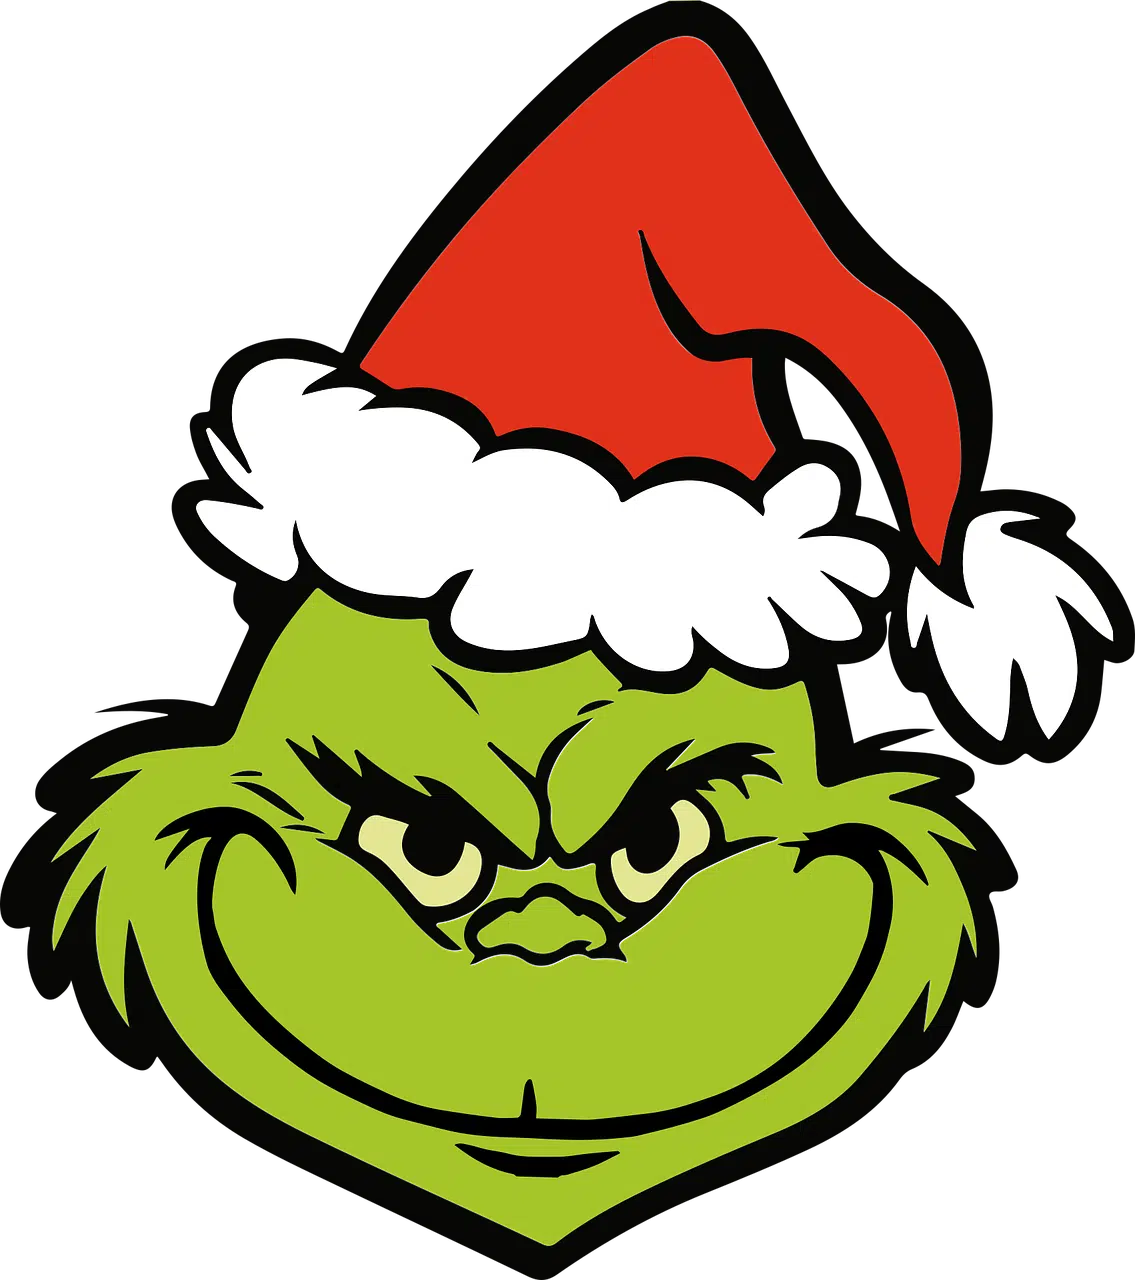 Grinch sequel? New Seuss 'How the Grinch Stole Christmas!' book coming